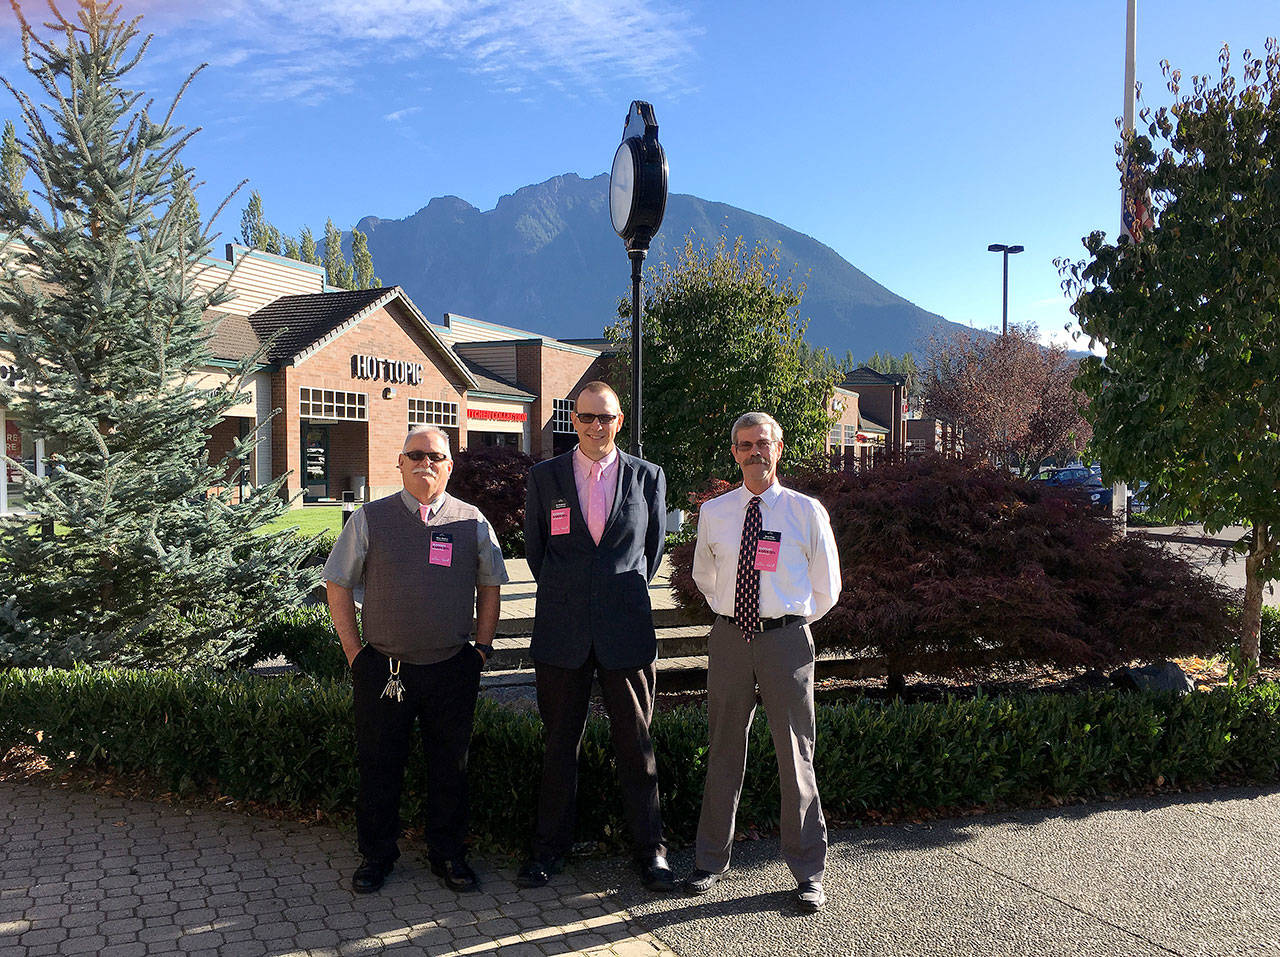 North Bend Premium Outlets management stands in the mall. From left: Operations Director Mike Matava, General Manager Ed Huebner, and Office Administrator Dave Prior. (Courtesy Photo)